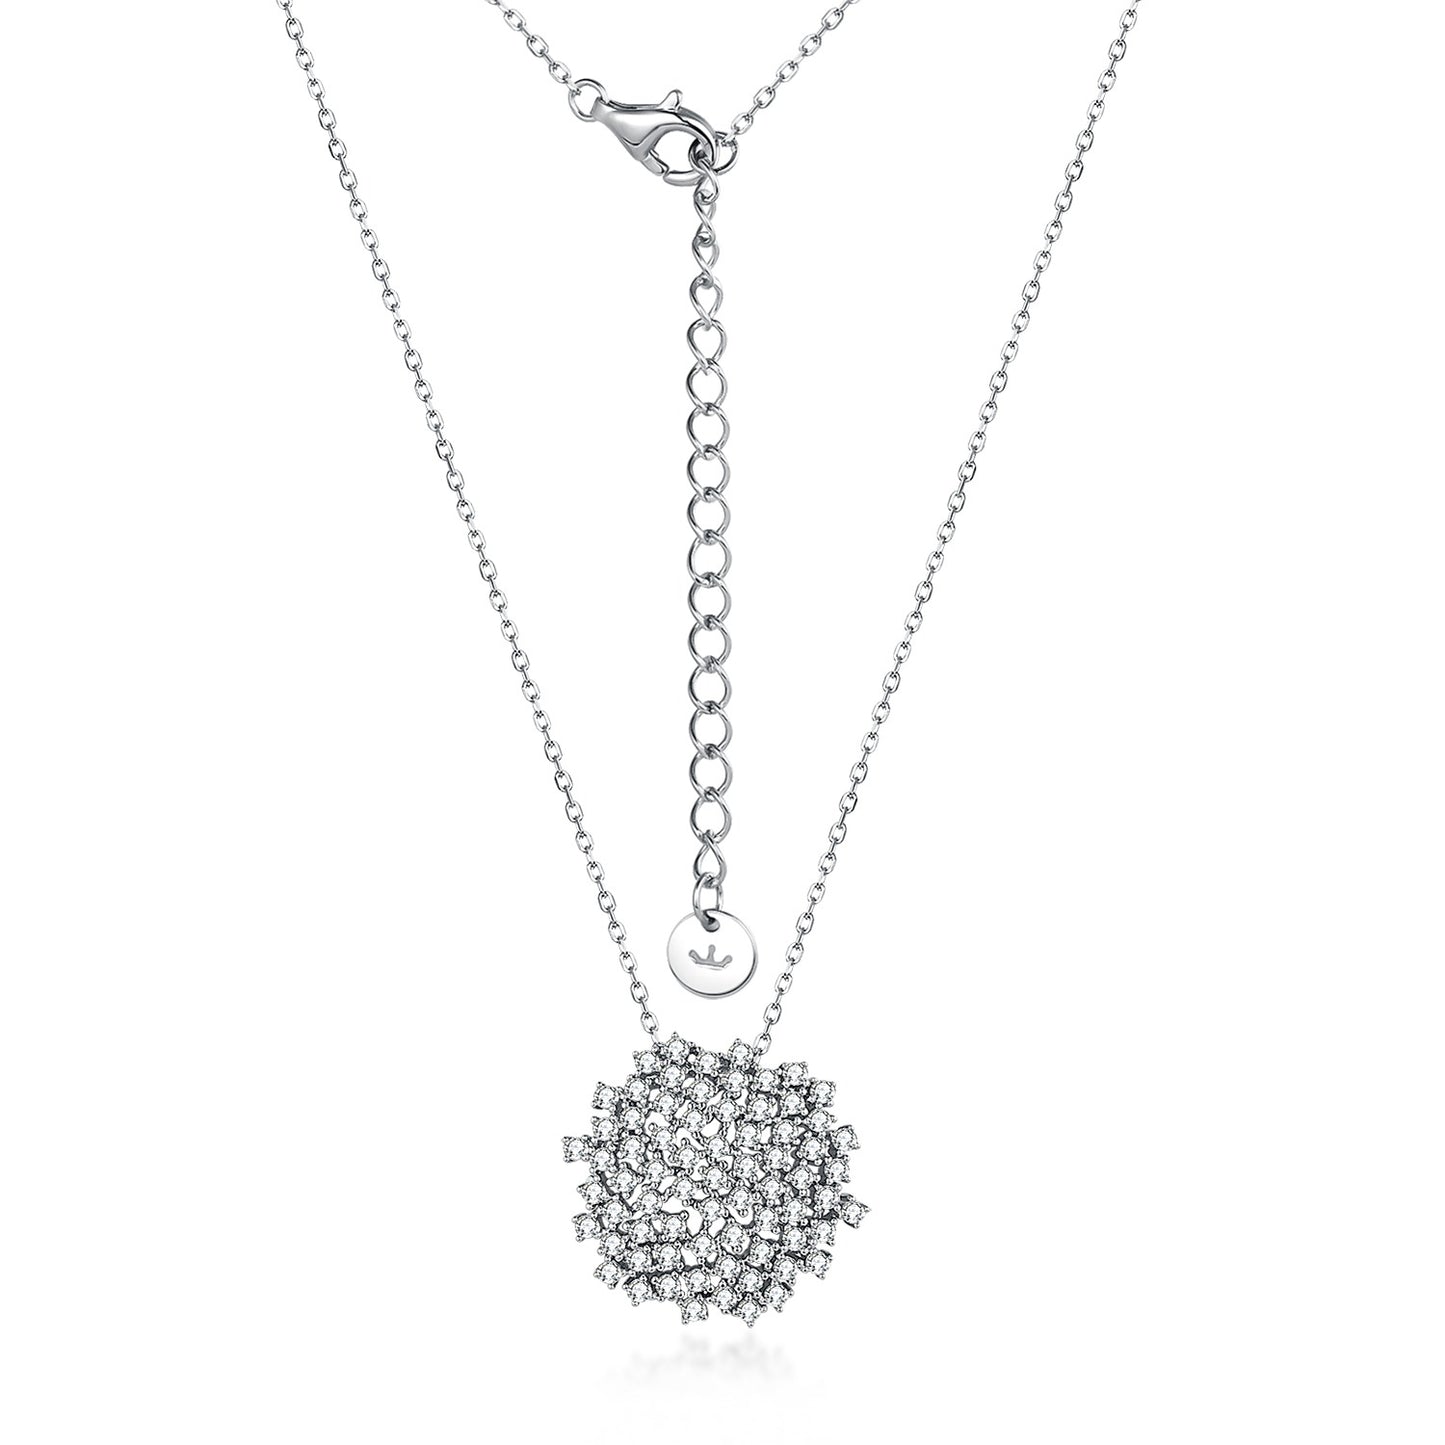 Rhodium Plated Sterling Silver Sprinkled Circle Pendant Necklace